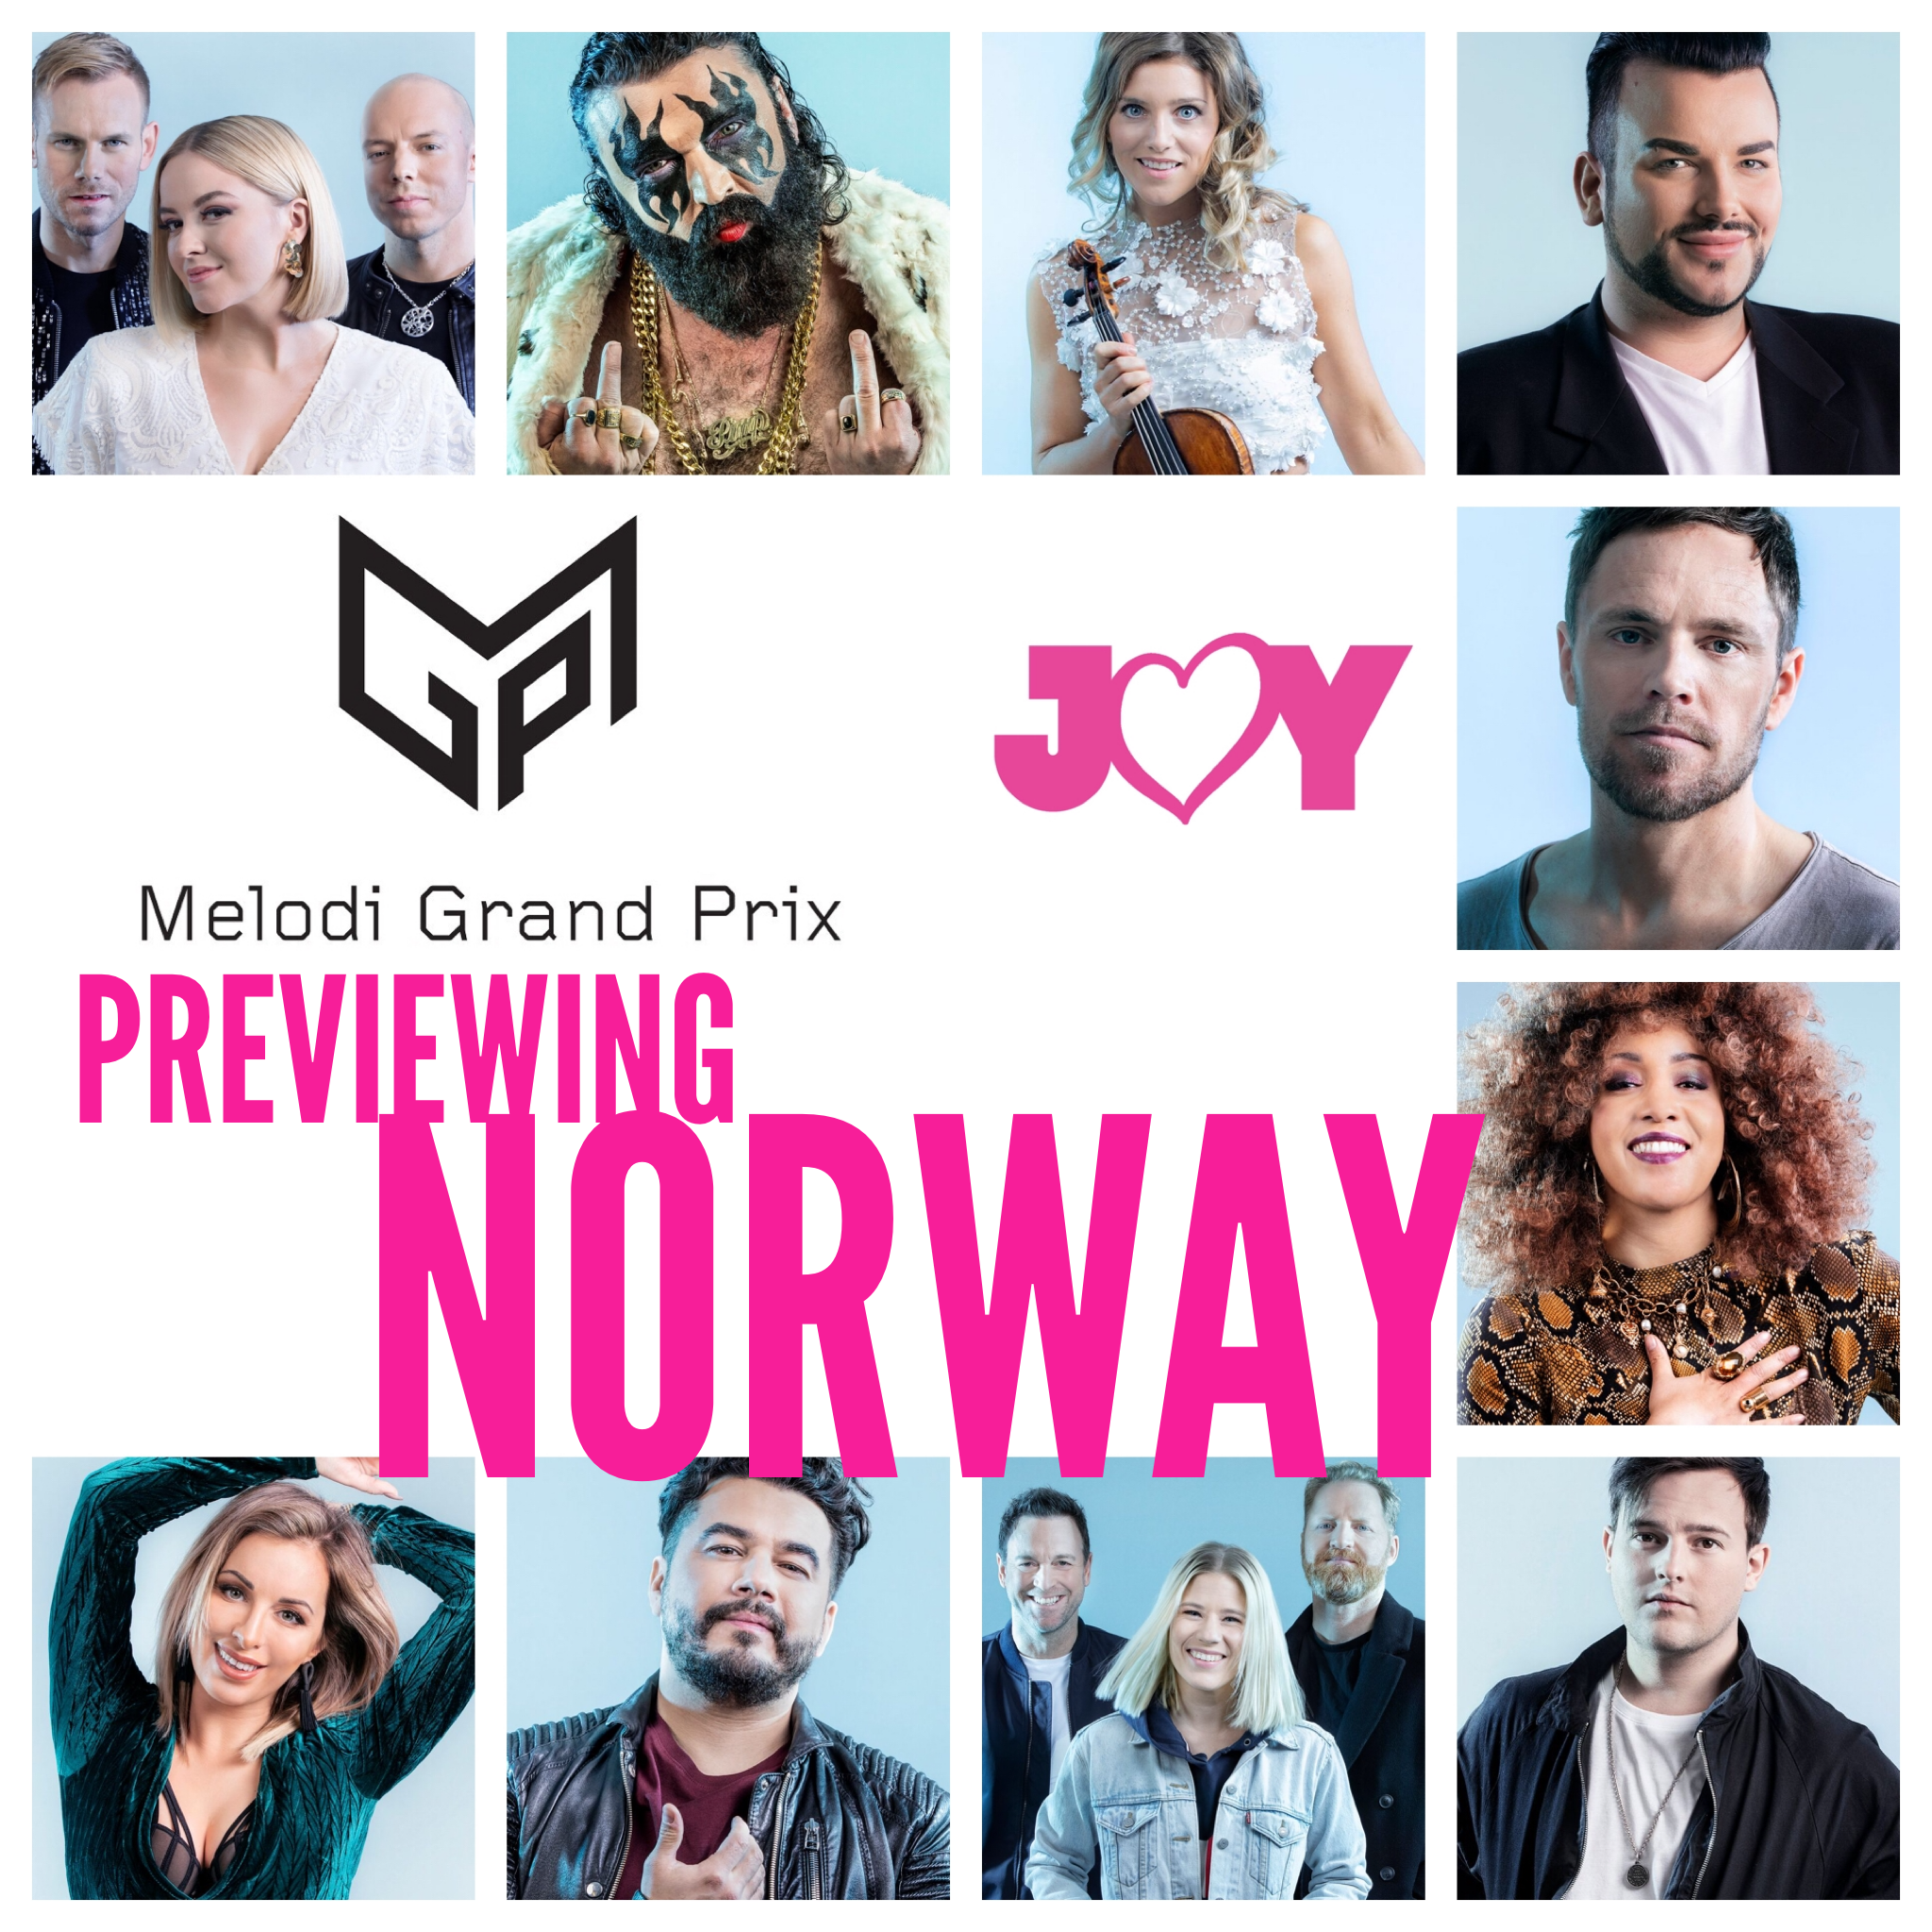 Unicorns, skies and daddies: Previewing Norway’s Melodi Grand Prix